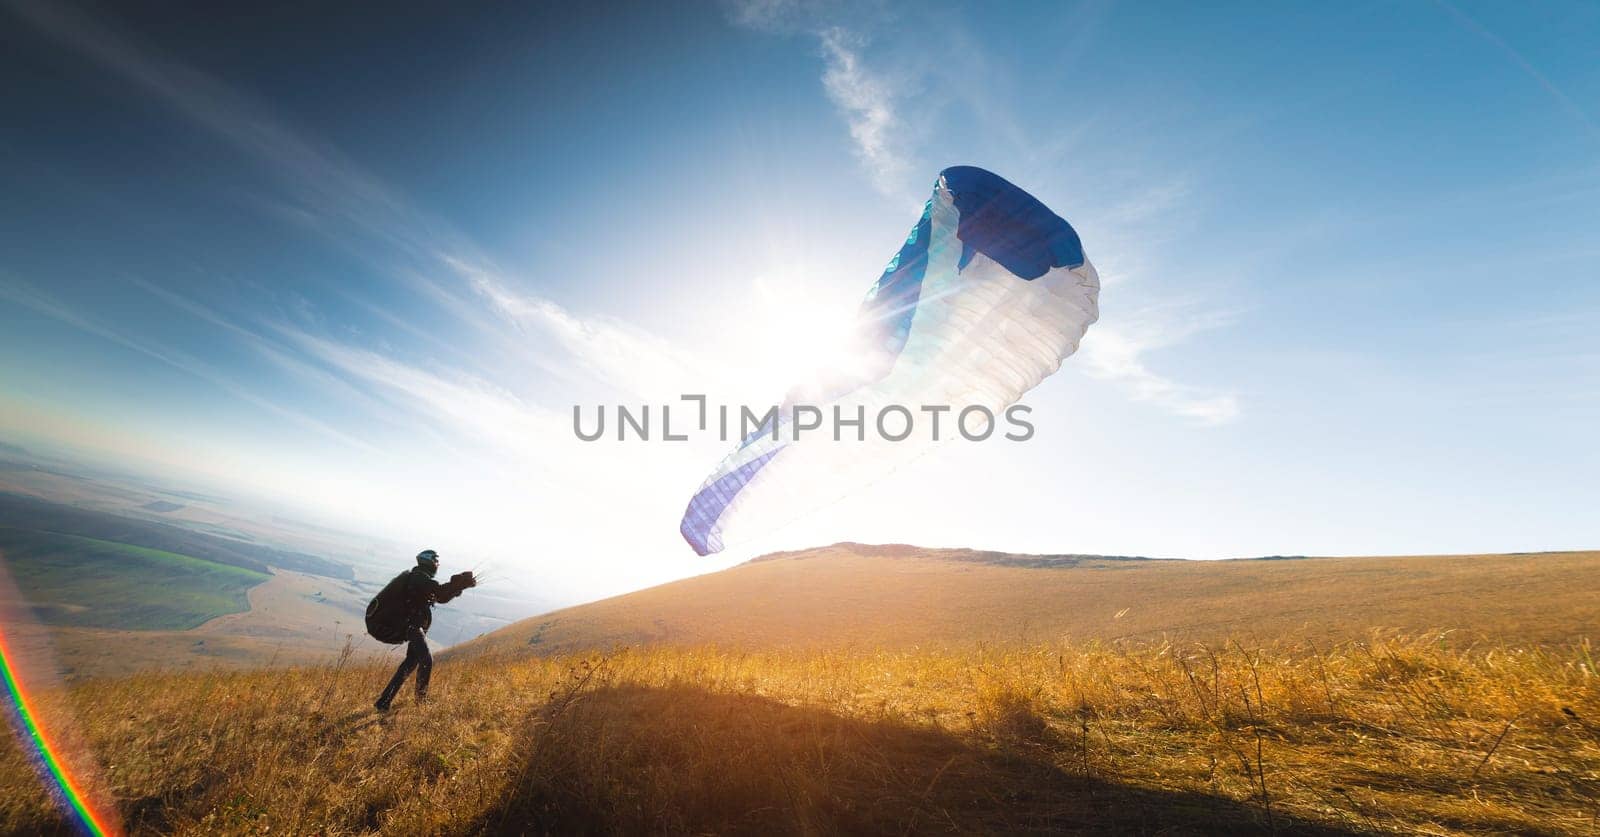 paraglider with a blue parachute takes off. A man takes off and lands on a yellow field. a man preparing to take off with an open paraglider already in the air by yanik88